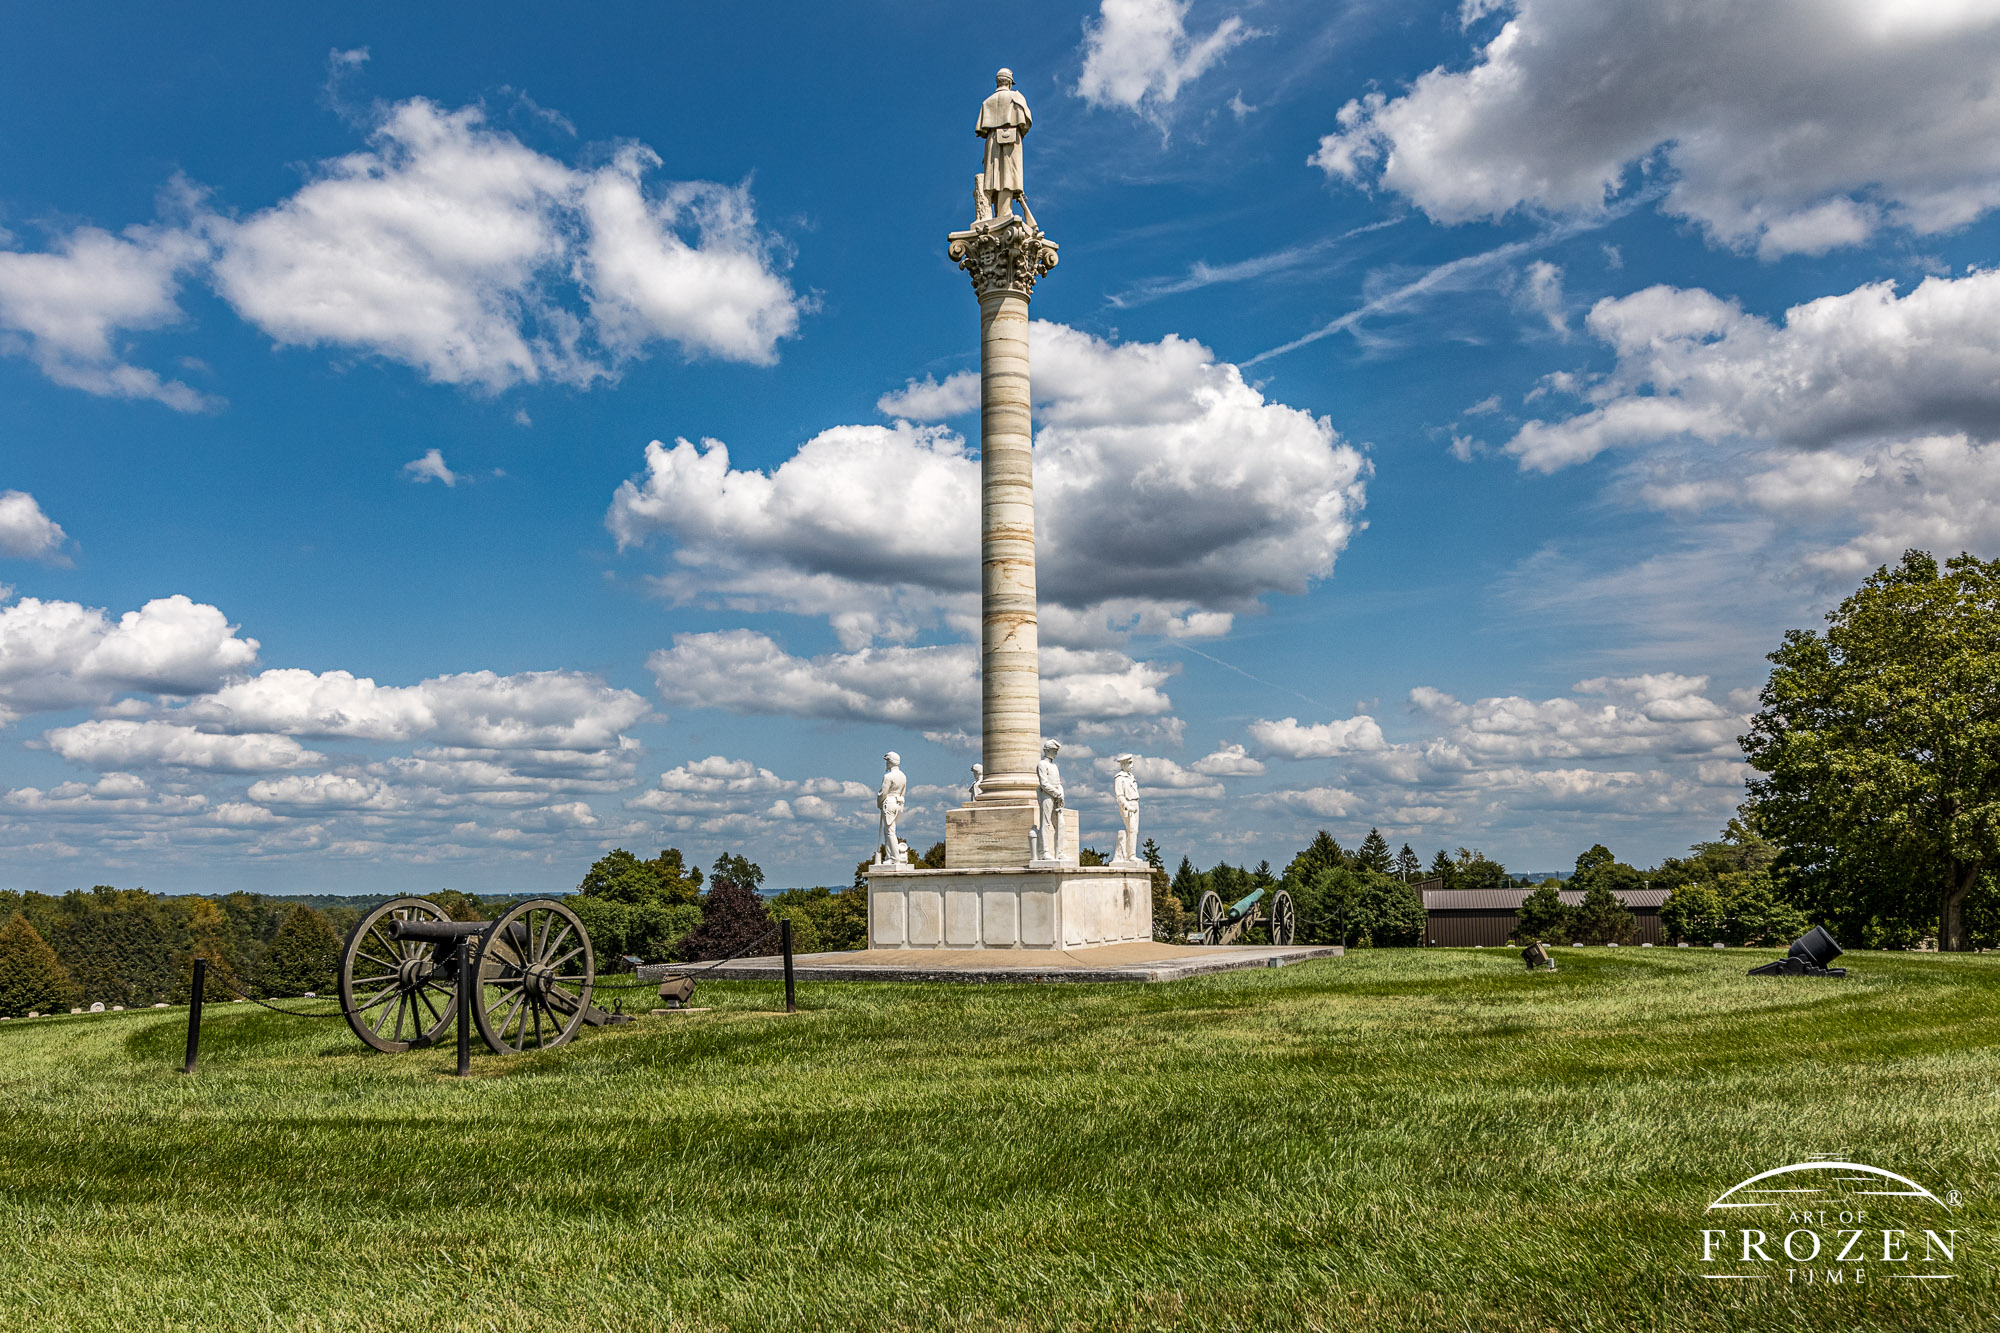 A perfect summer day featuring a white column monument with a Civil War Soldier perched under blue skies and cumulus clouds staring off to the eastern horizon